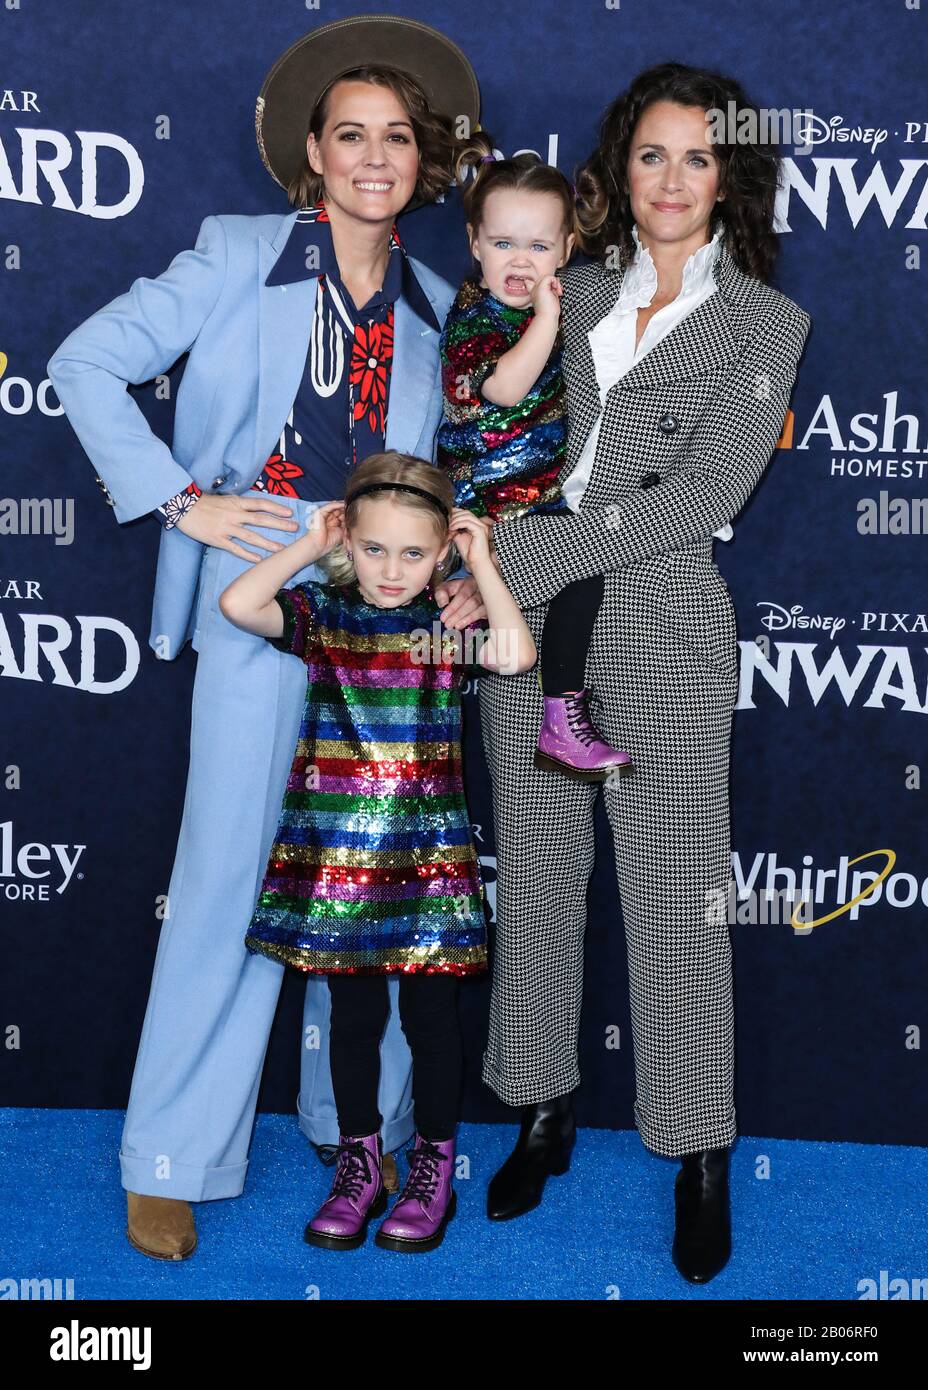 Hollywood, United States. 18th Feb, 2020.  Brandi Carlile, Evangeline Ruth Carlile, Elijah Carlile and Catherine Shepherd arrive at the World Premiere Of Disney And Pixar's 'Onward' held at the El Capitan Theatre on February 18, 2020 in Hollywood, Los Angeles, California, United States. (Photo by Xavier Collin/Image Press Agency) Credit: Image Press Agency/Alamy Live News Stock Photo